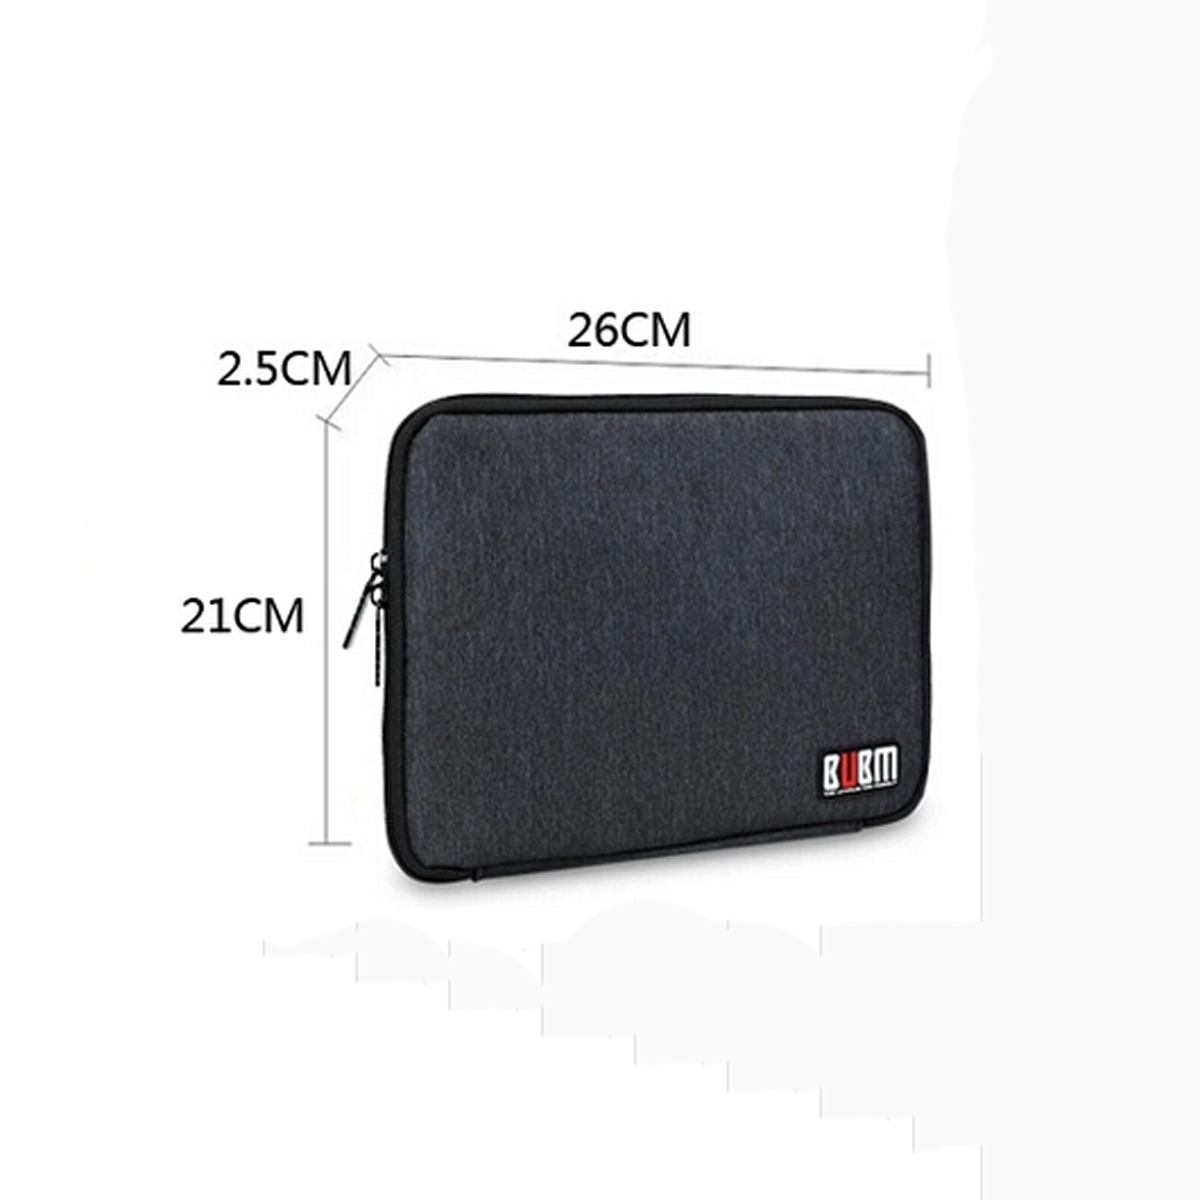 BUBM oversized Capacity Watch Tablet Earphone U Disk Cable Digital Devices Cable Organizer Case Storage Bag